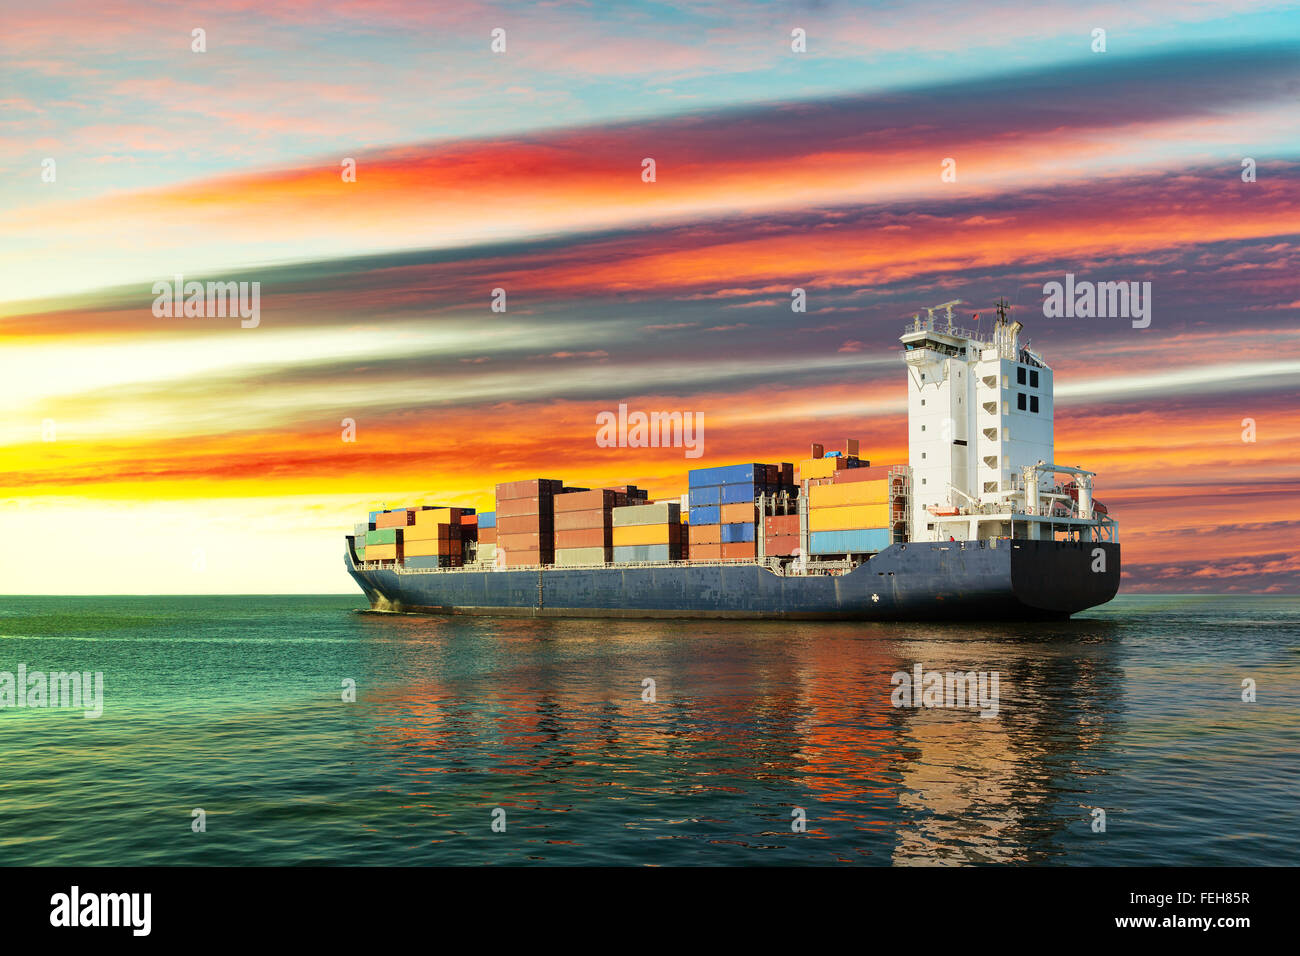 Sailing container ship at sunset on sea. Stock Photo